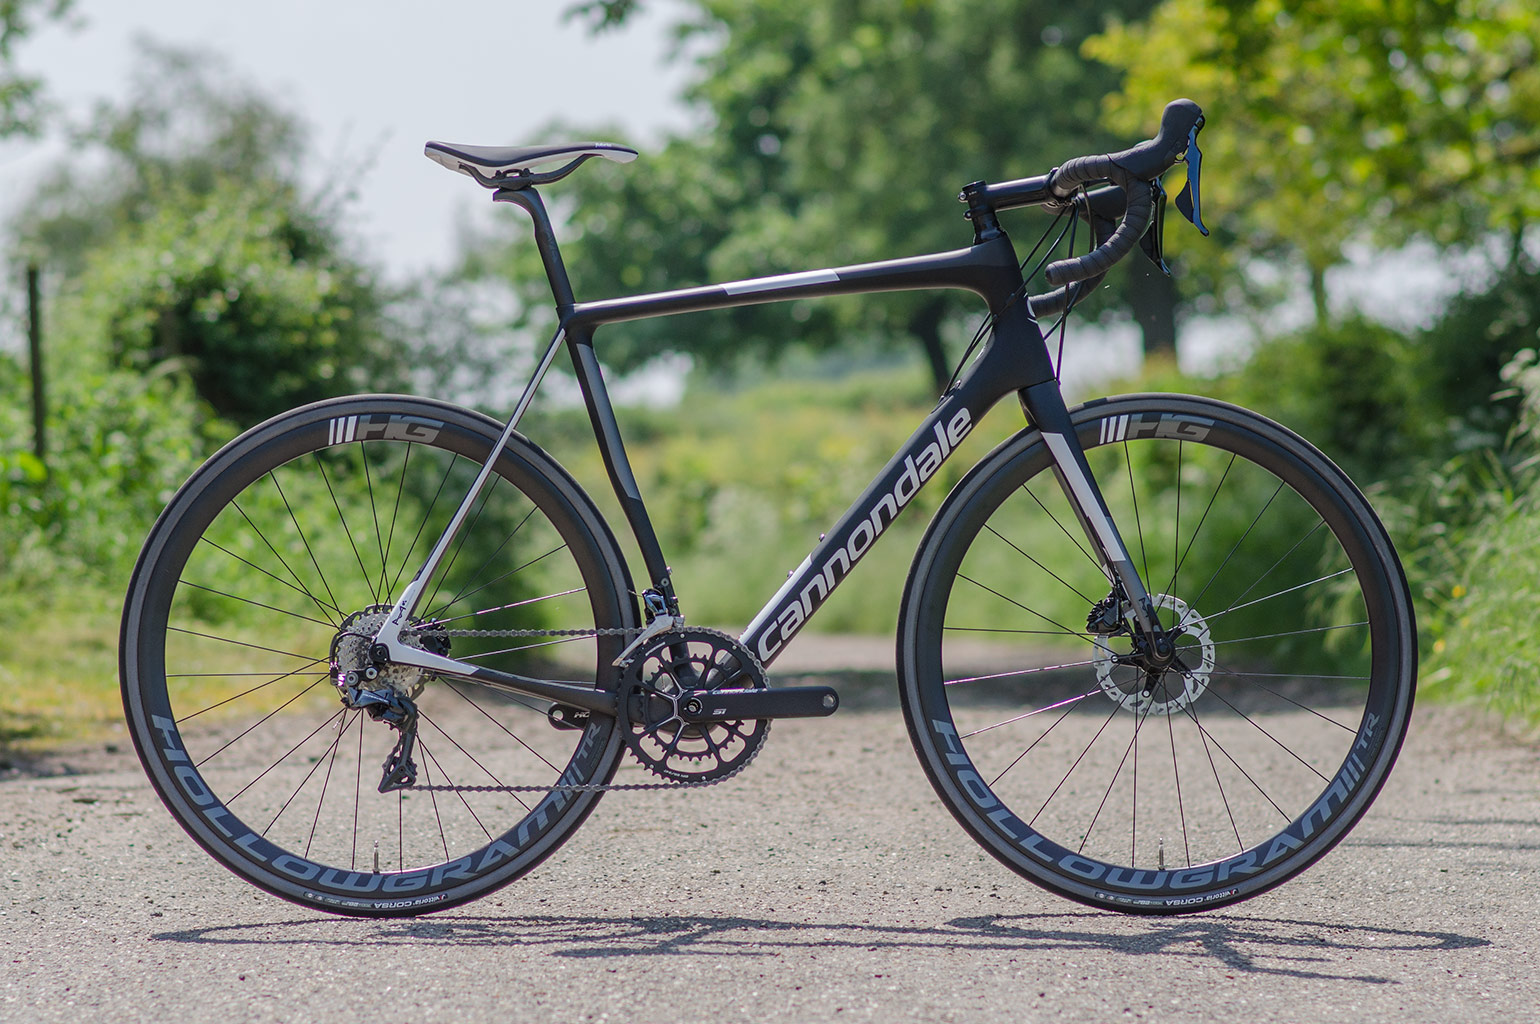 synapse dura ace